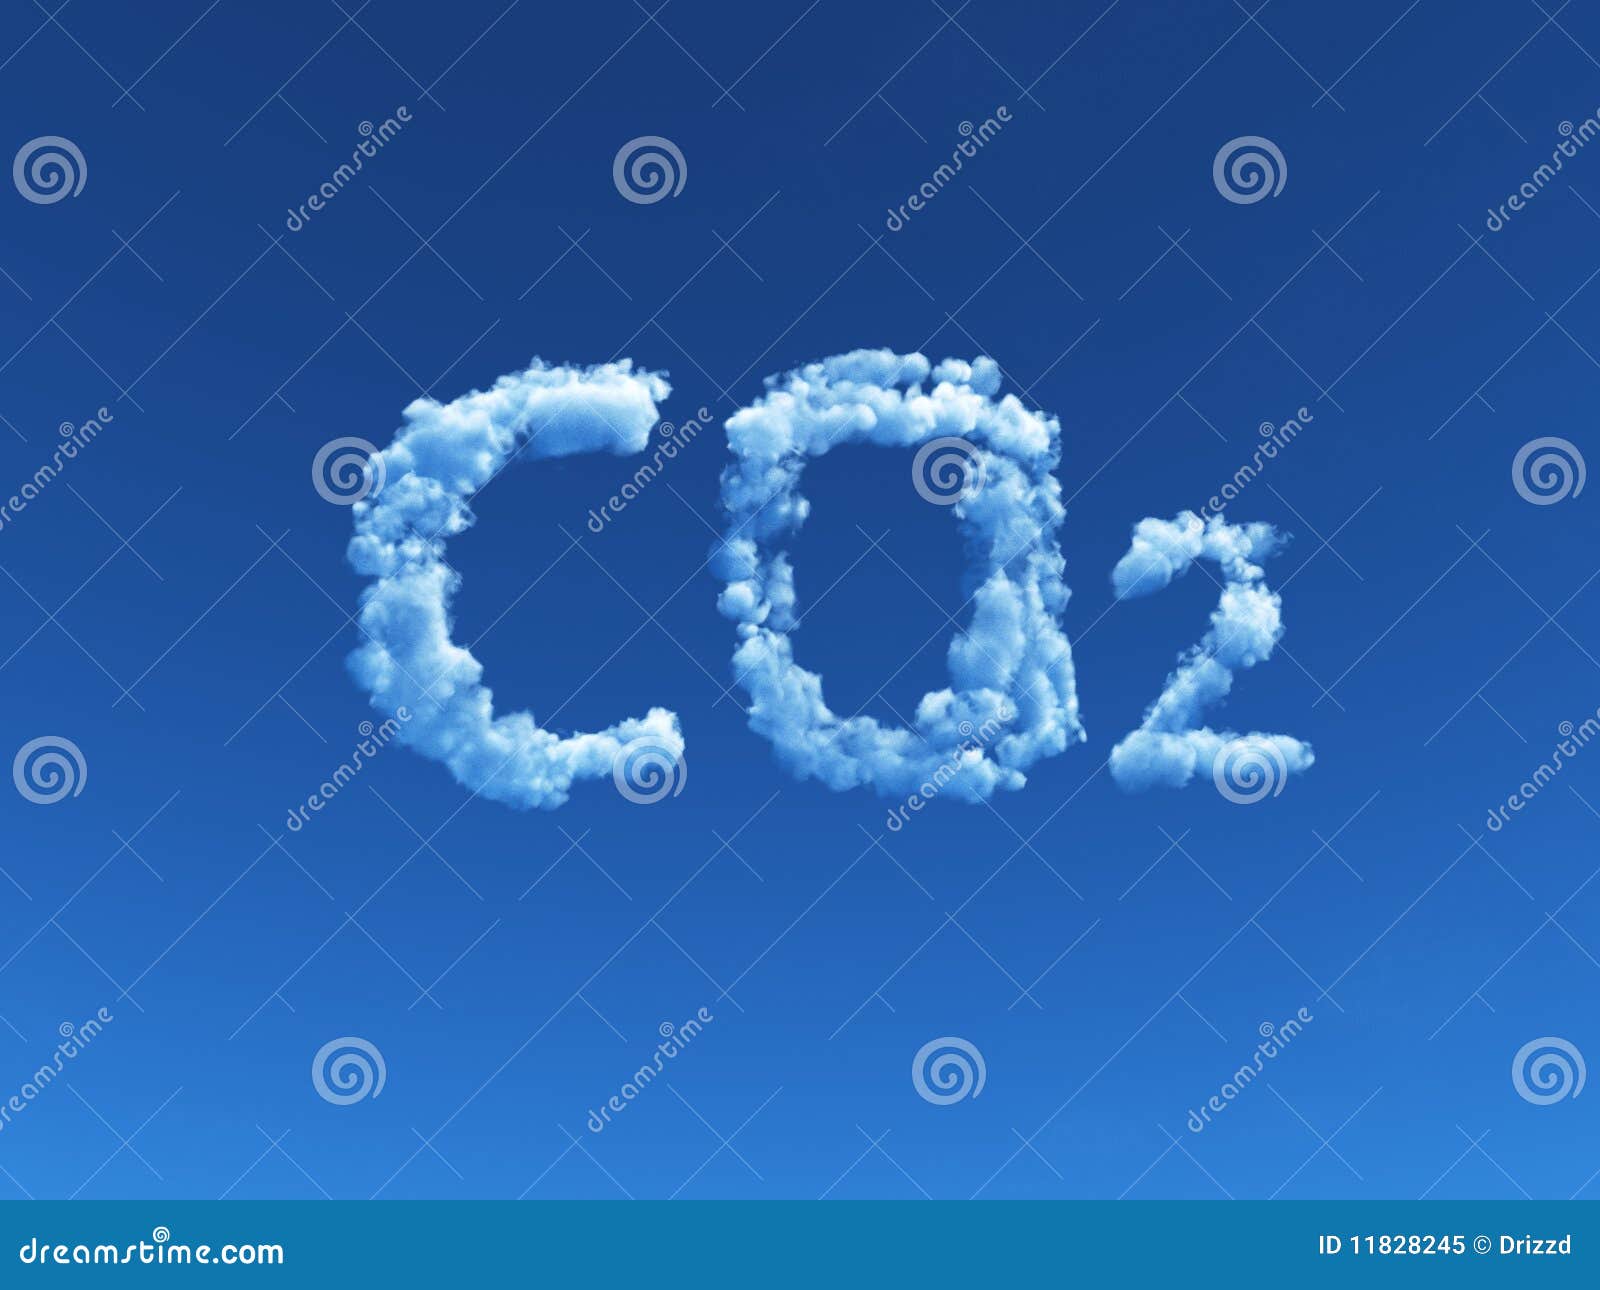 cloudy co2